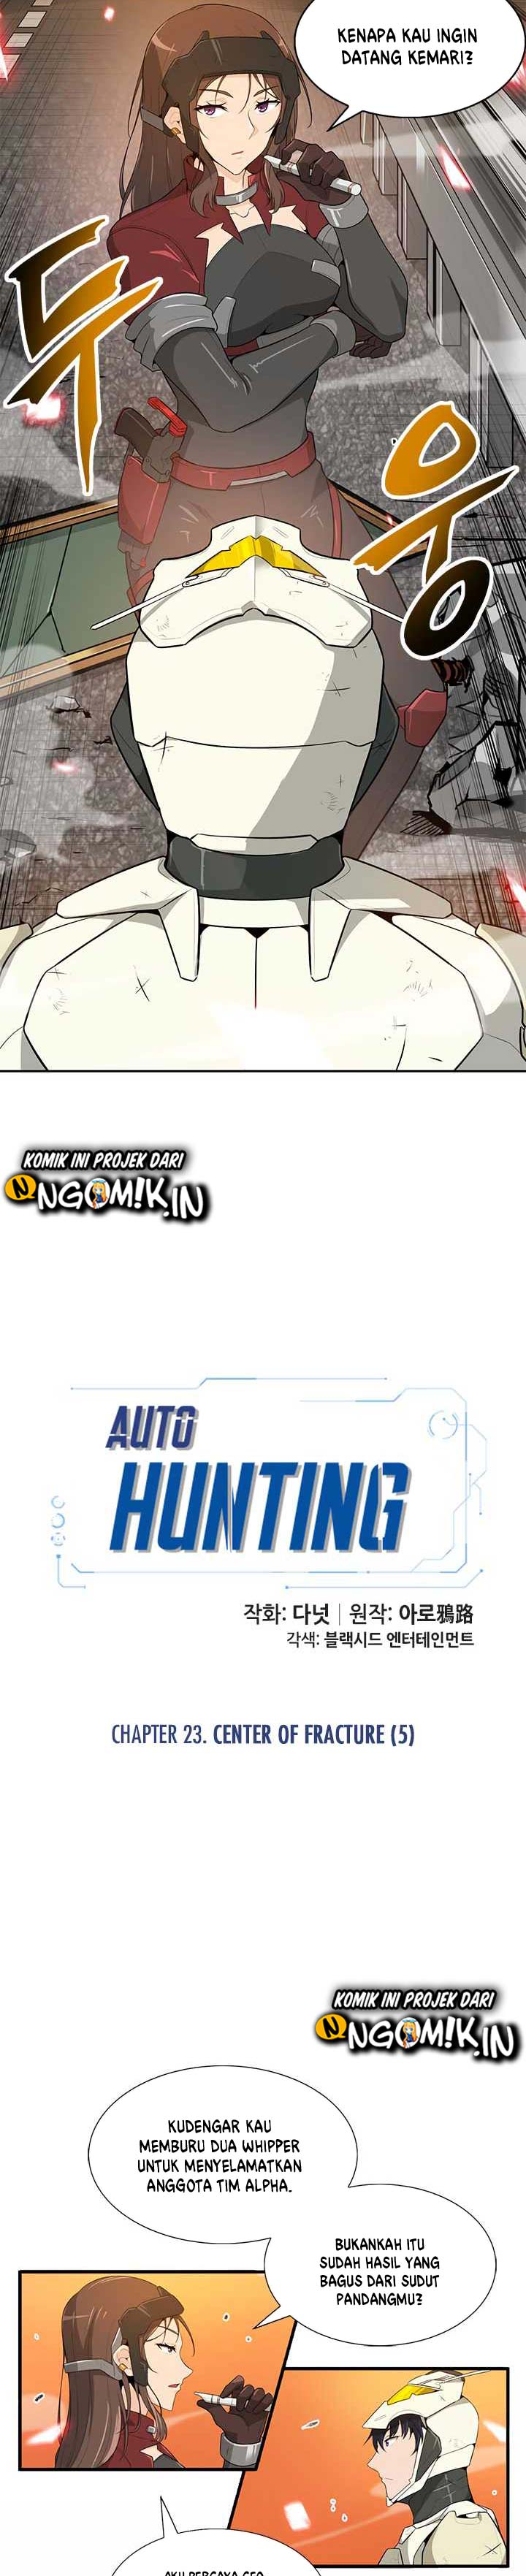 Auto Hunting Chapter 23